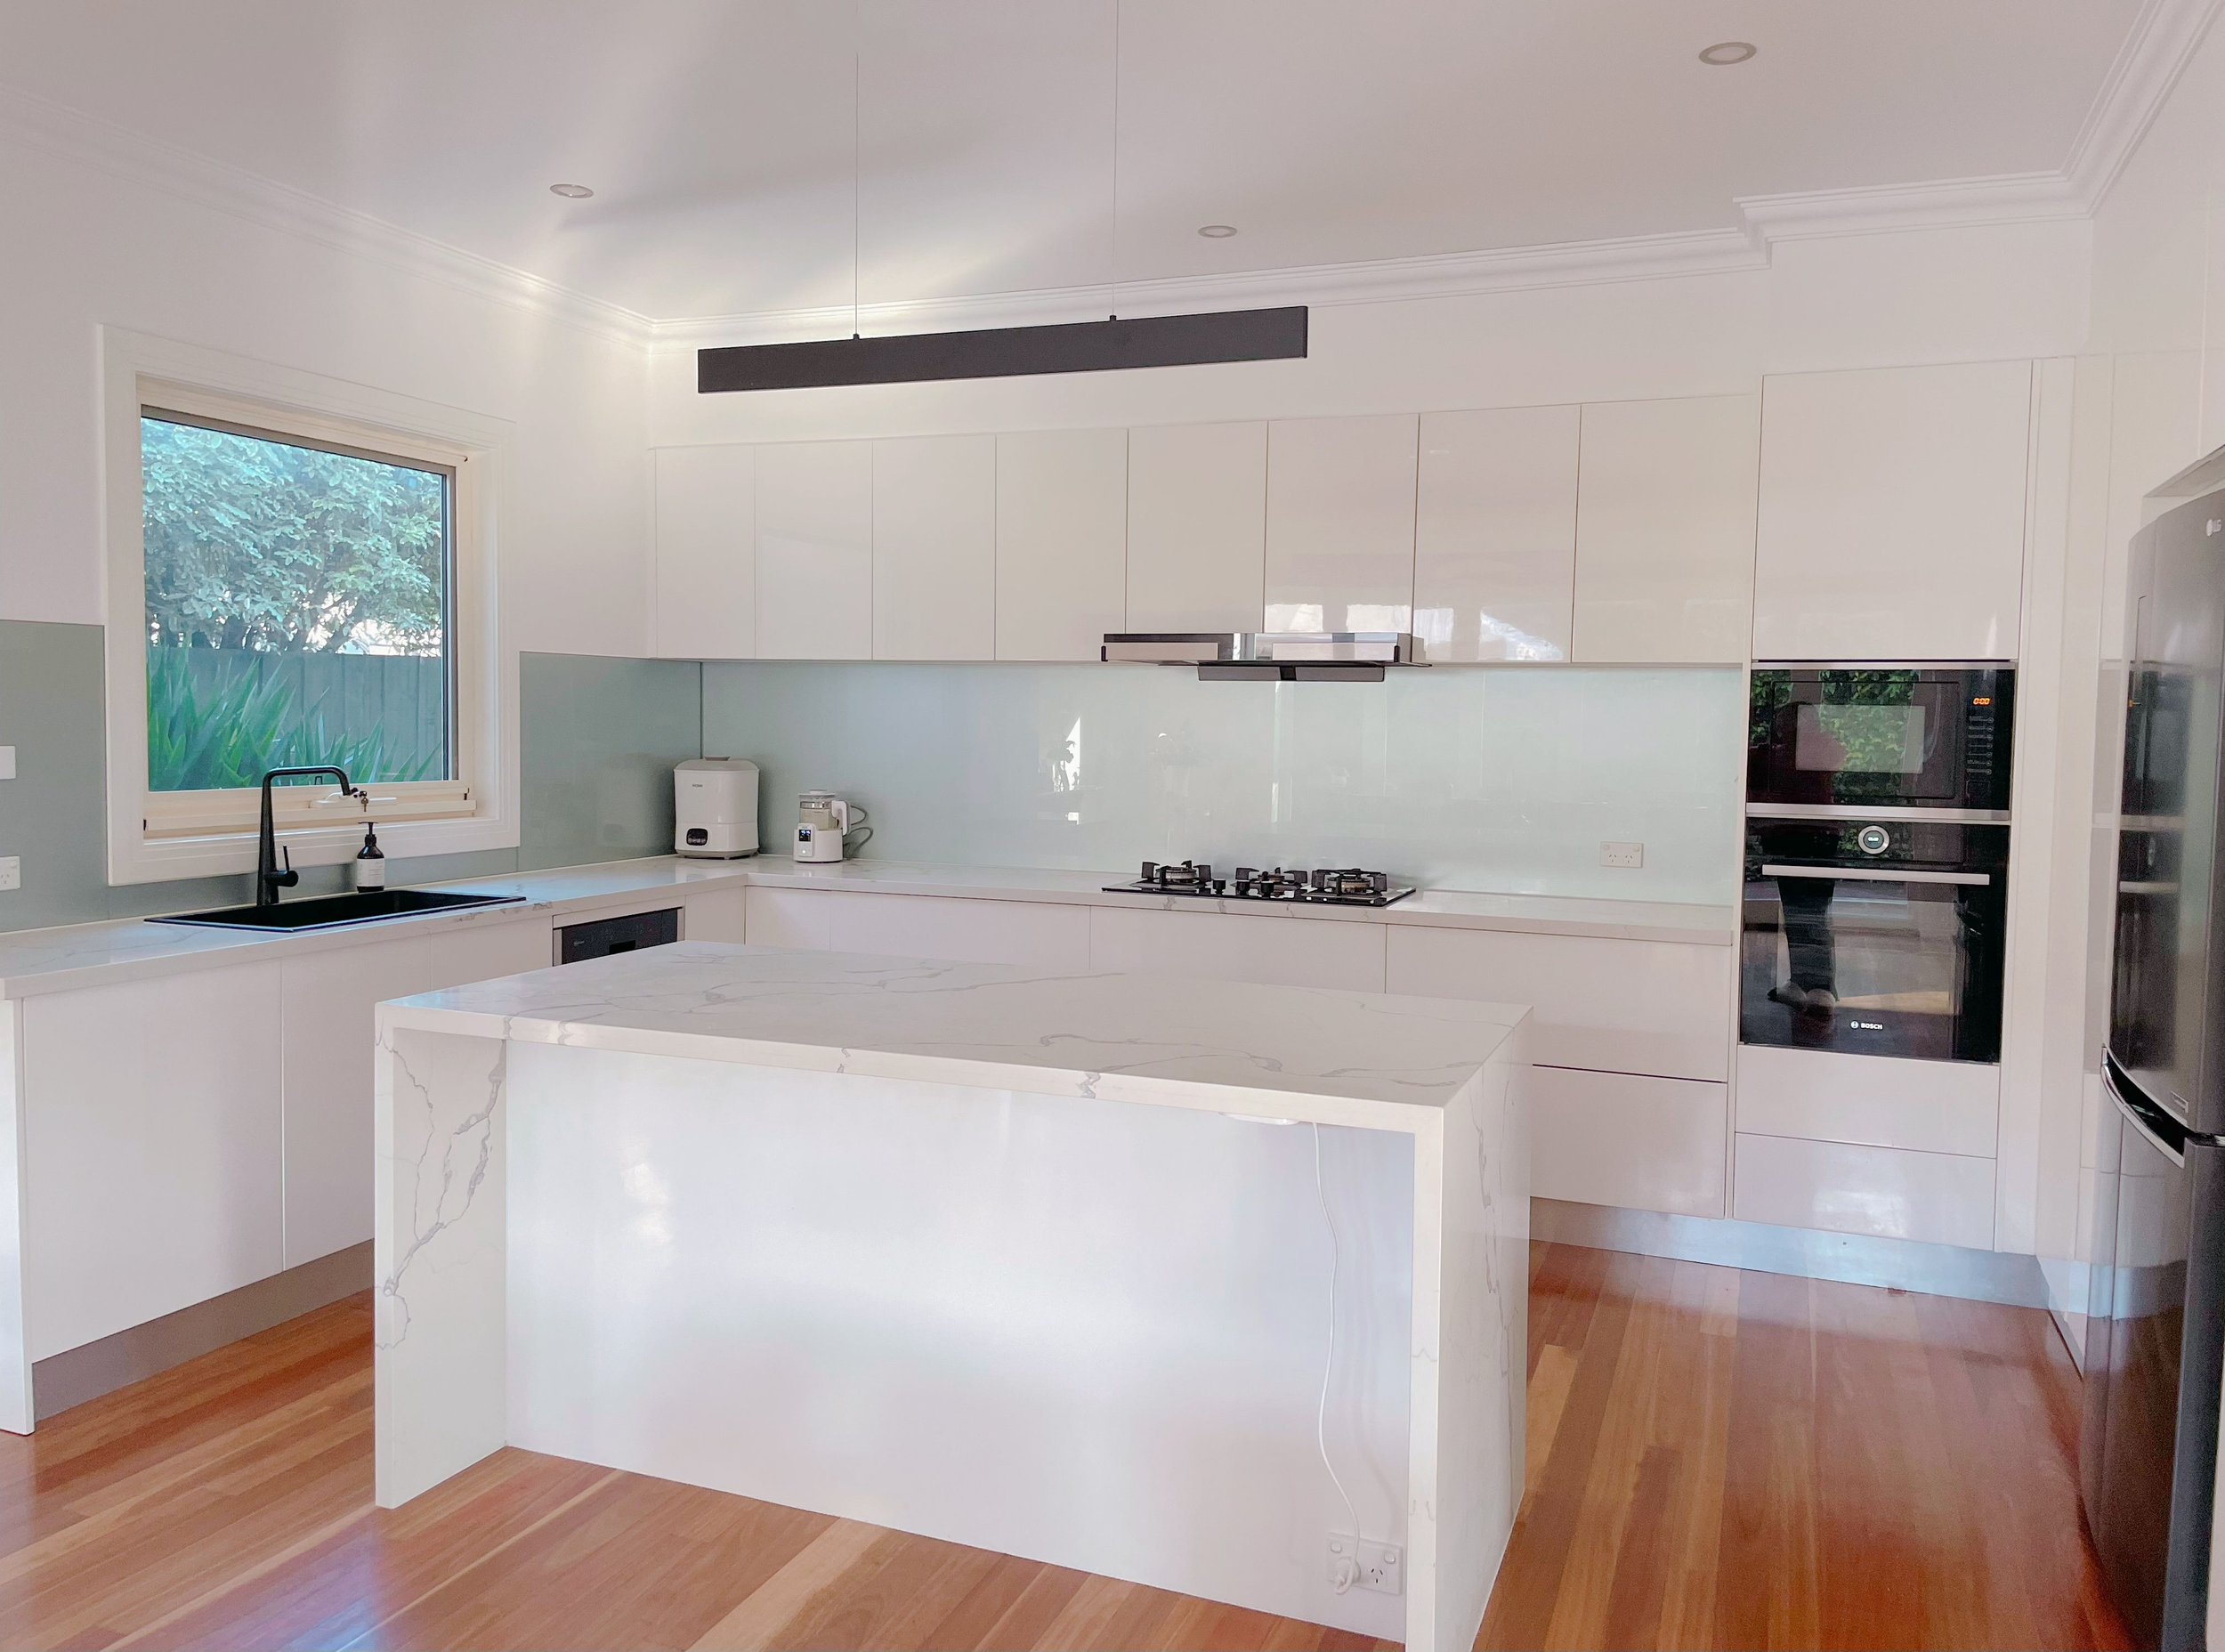 Brighton East - 355 South Road, Brighton East, VIC 3187 - Townly - 4.jpg